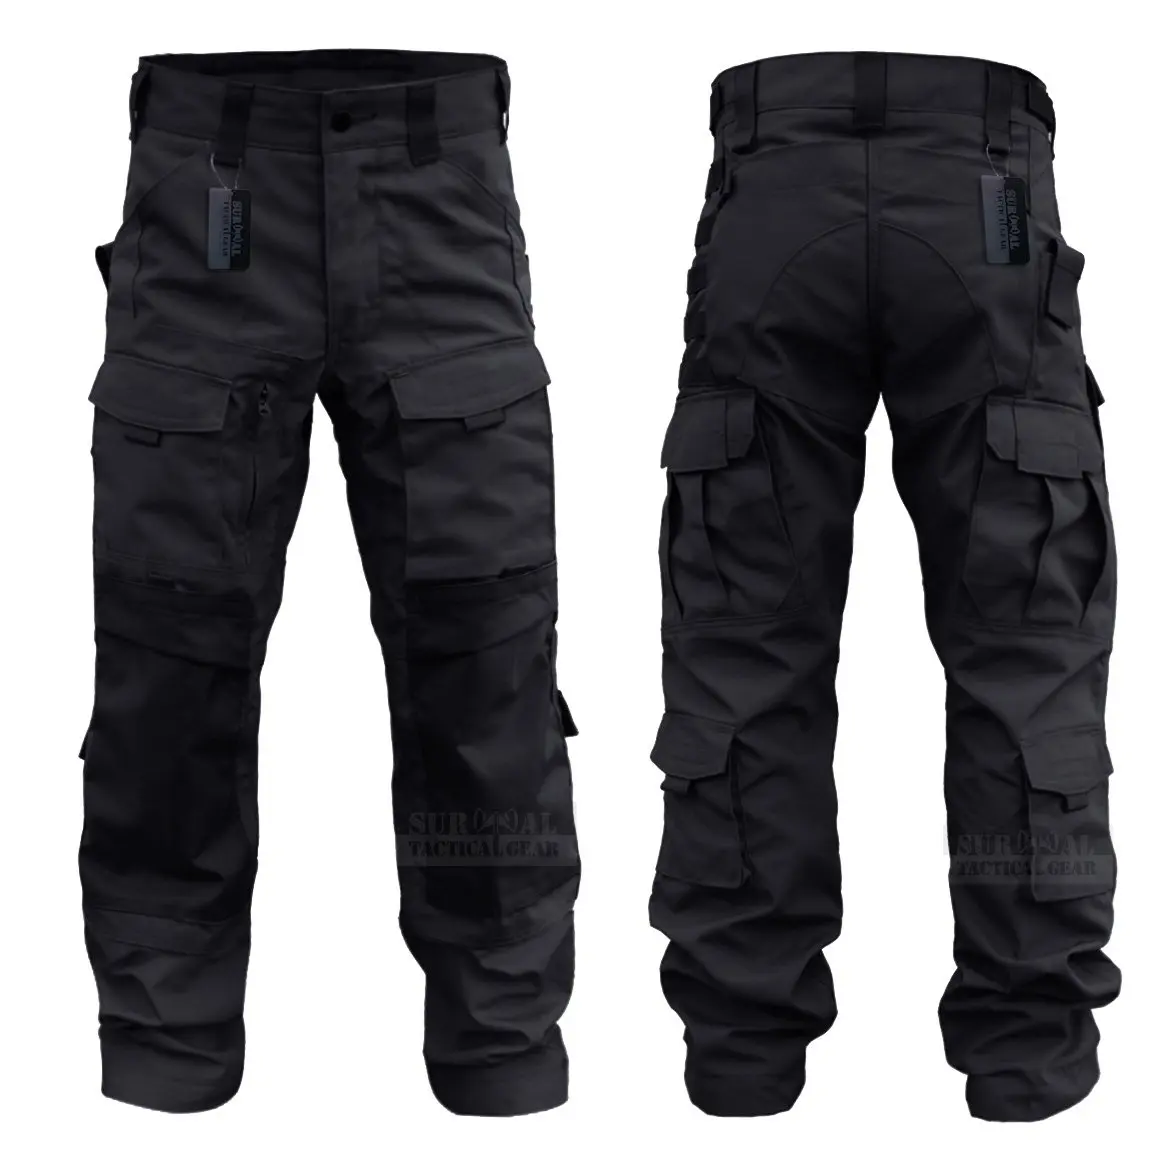 ZAPT Tactical Molle Ripstop Combat Trousers Army Multicam/A-TACS LE ...